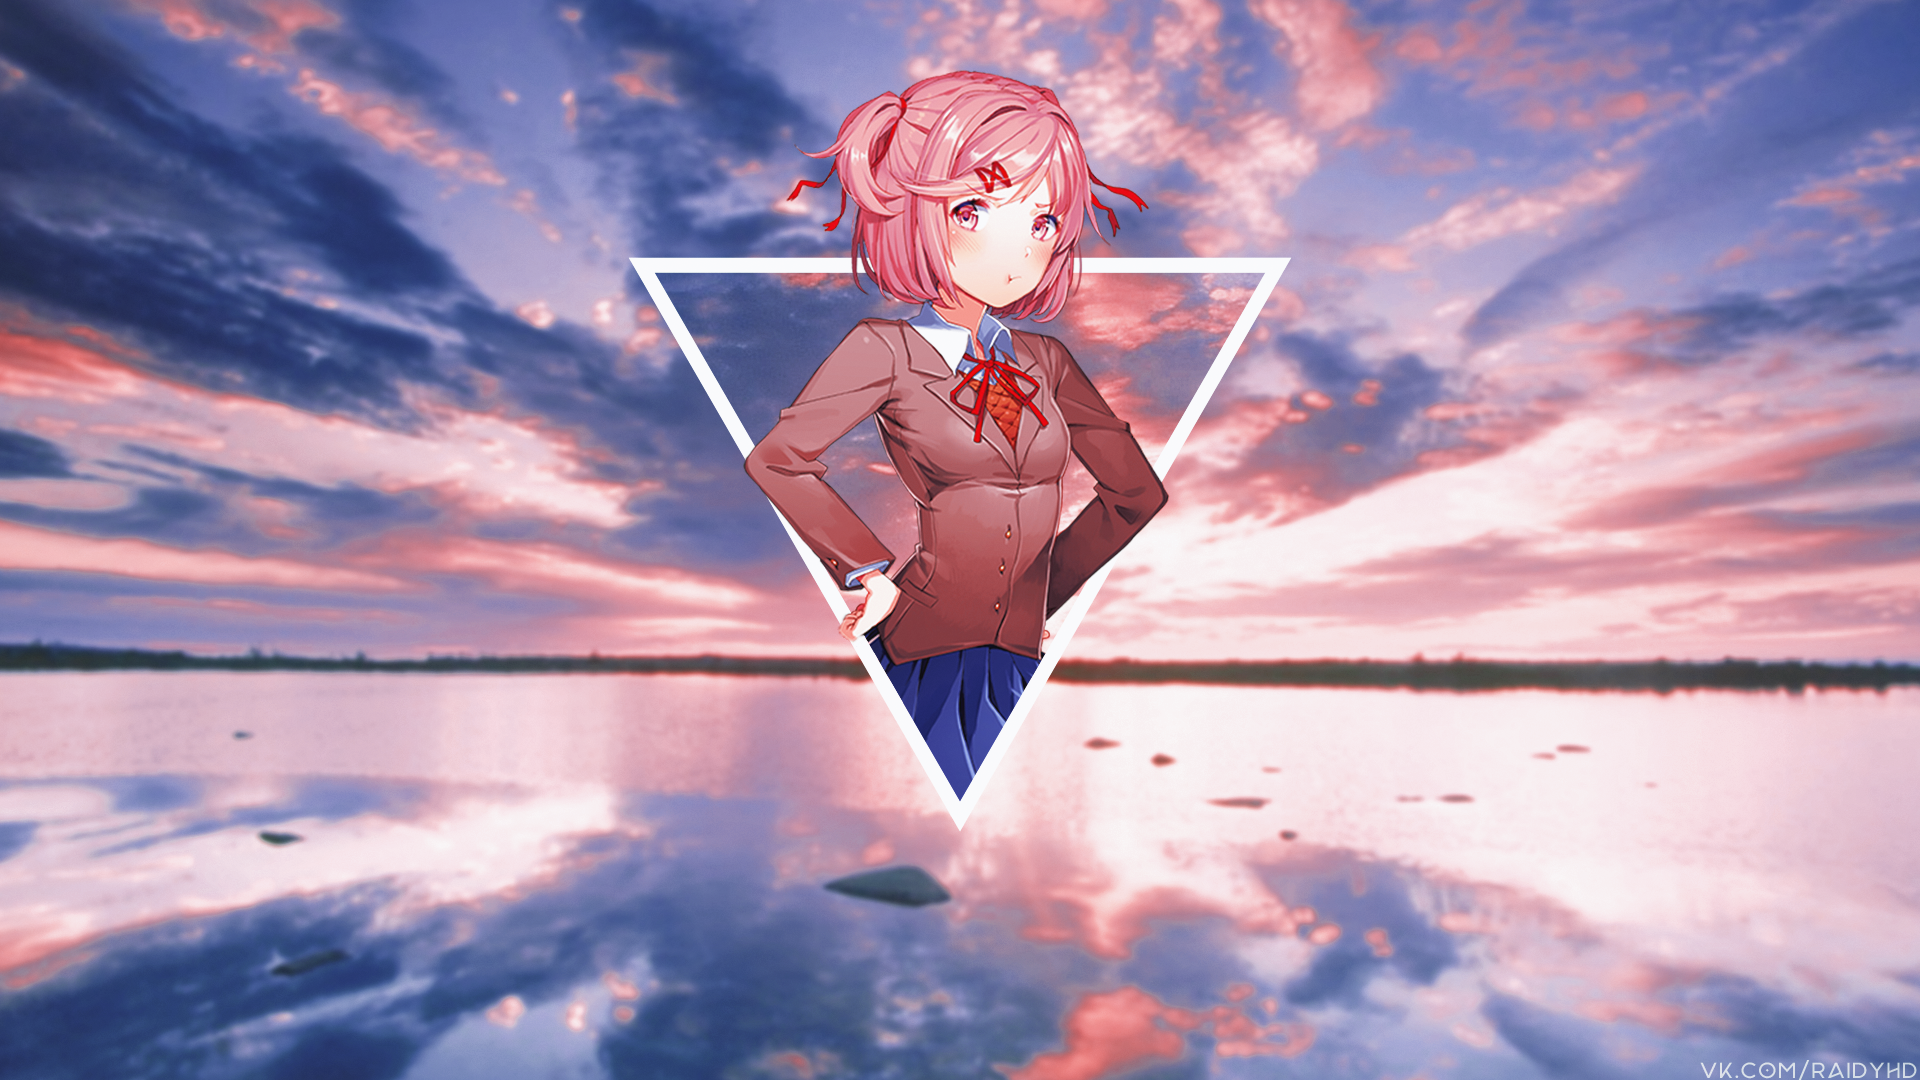 Anime 1920x1080 anime anime girls picture-in-picture Doki Doki Literature Club Natsuki (Doki Doki Literature Club) visual novel watermarked